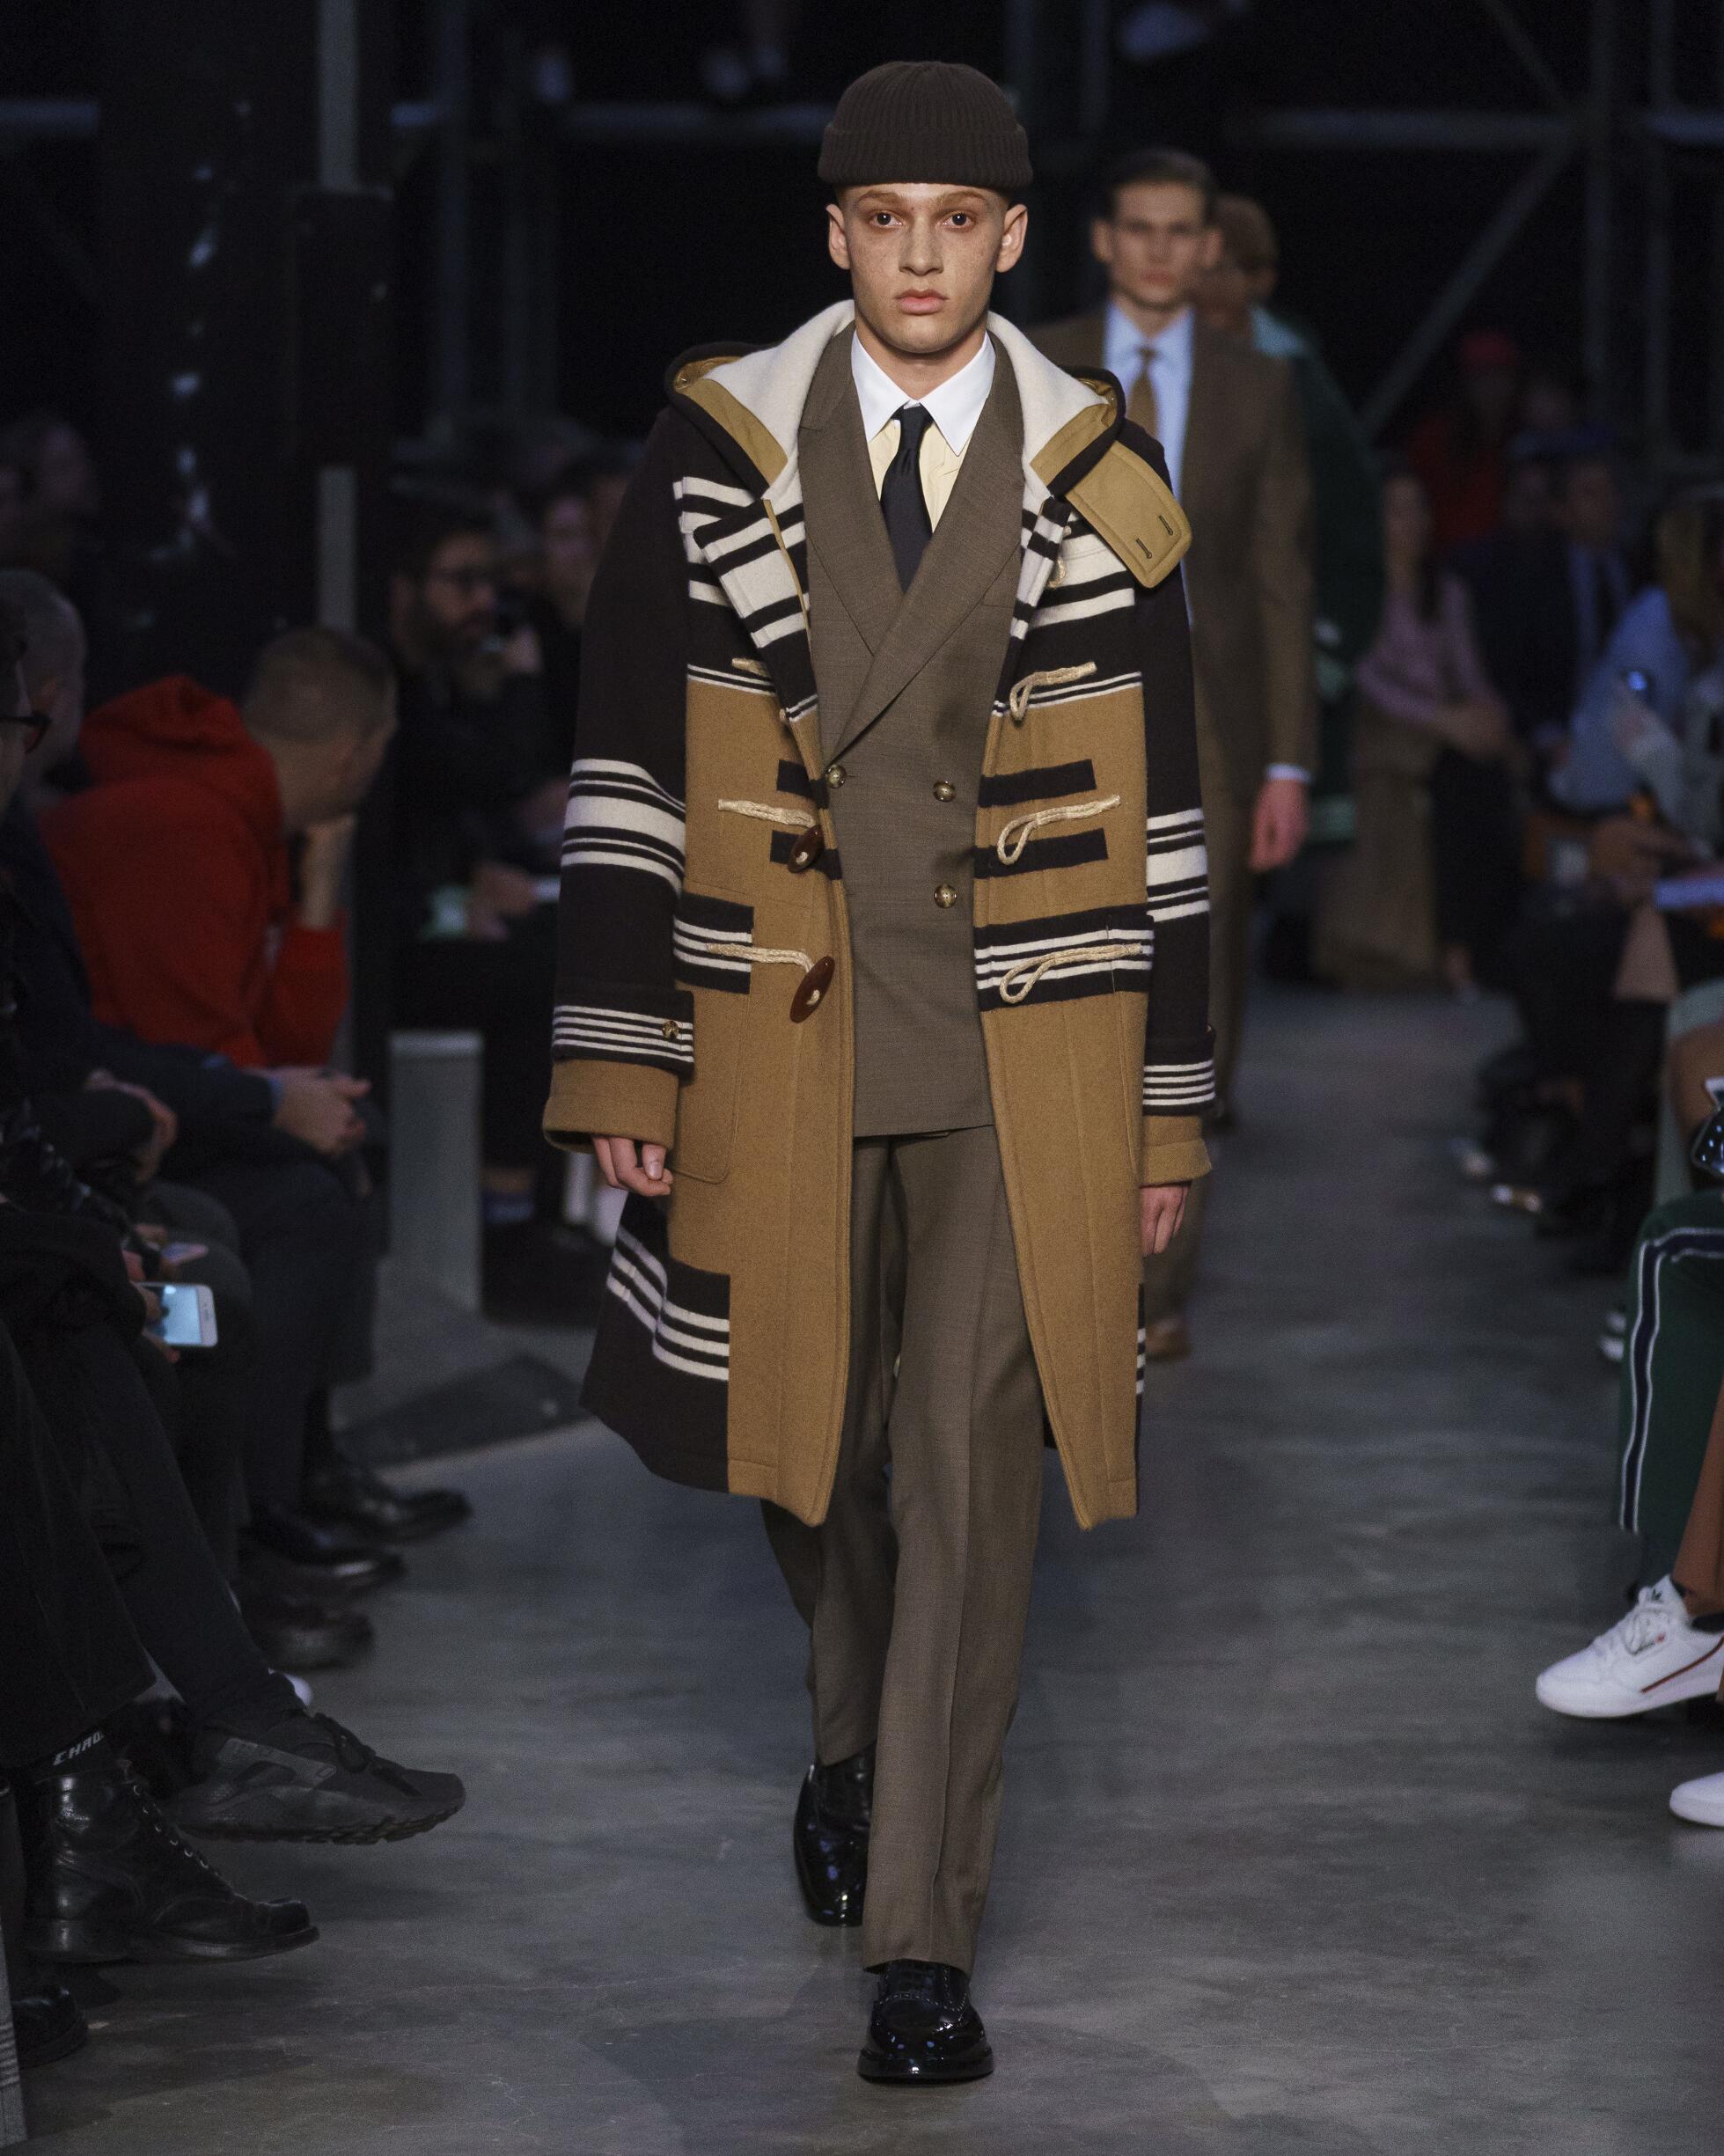 BURBERRY FALL WINTER COLLECTION The Skinny